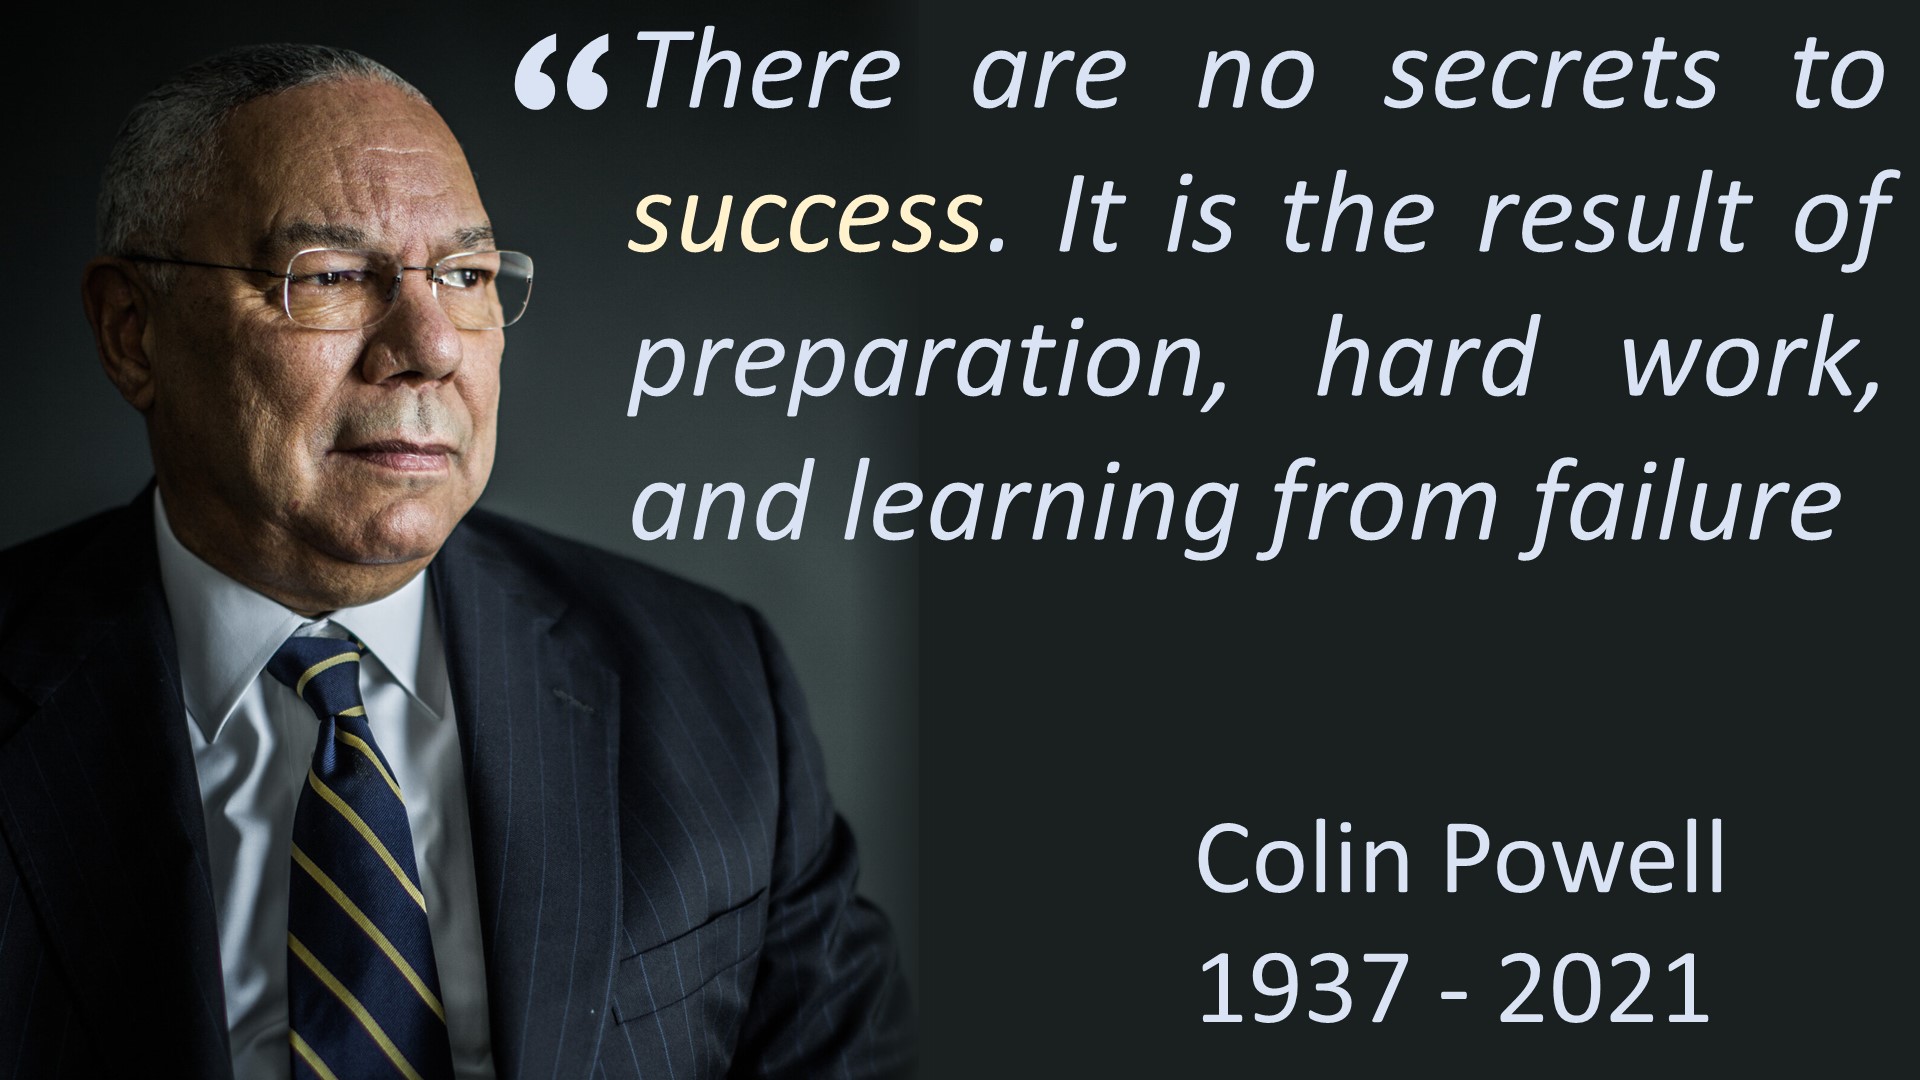 There are no secrets to success. It is the result of preparation, hard work, and learning from failure. [Colin Powell]